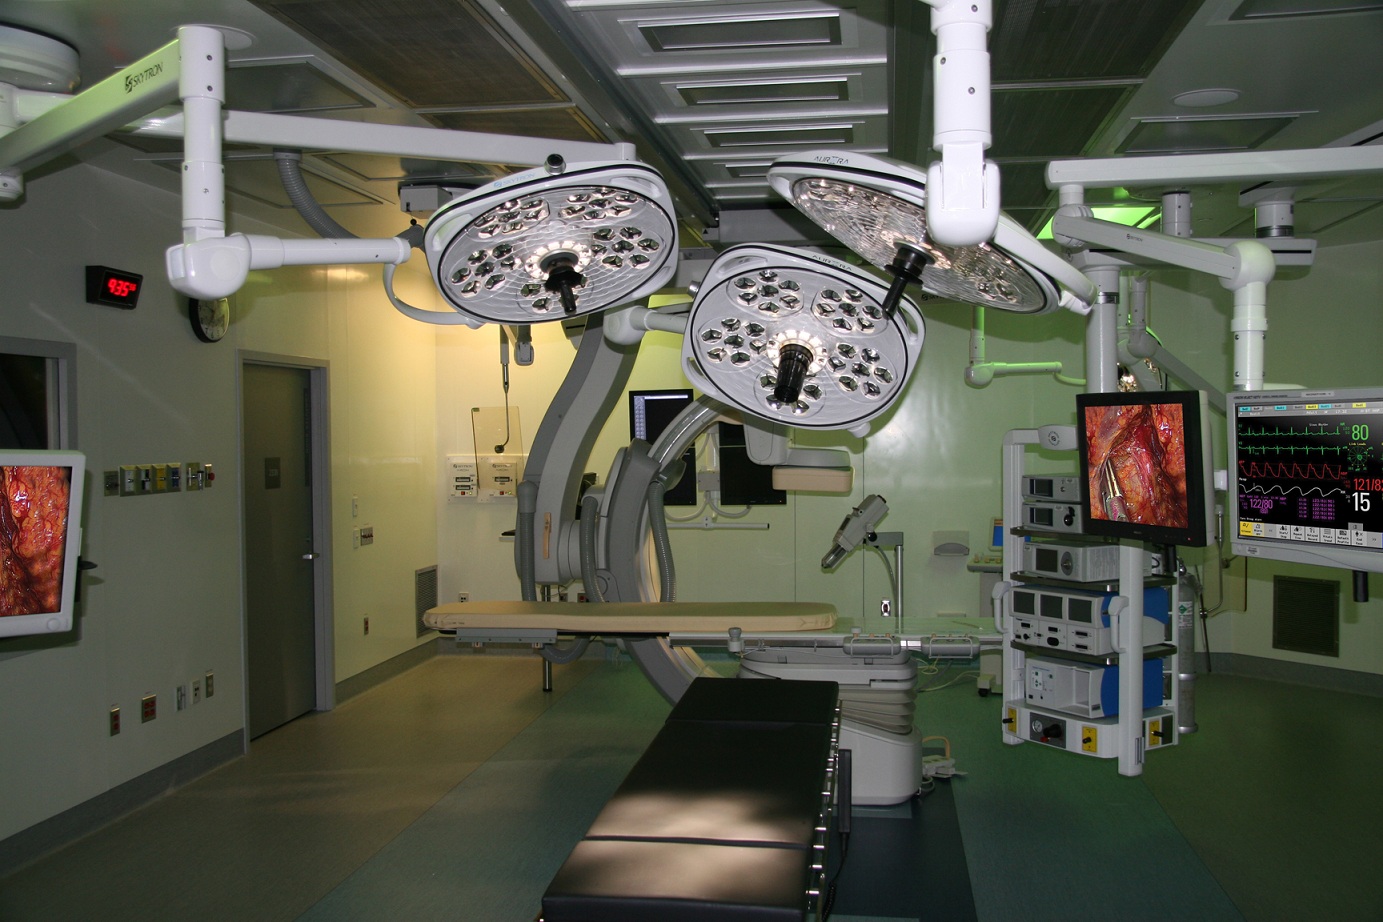 Hybrid-OR-Operating-Room-Philips-FD20-Ceiling-Skytron-LED-Surgical-Lights-Dual-Cockpit-Layout.jpg